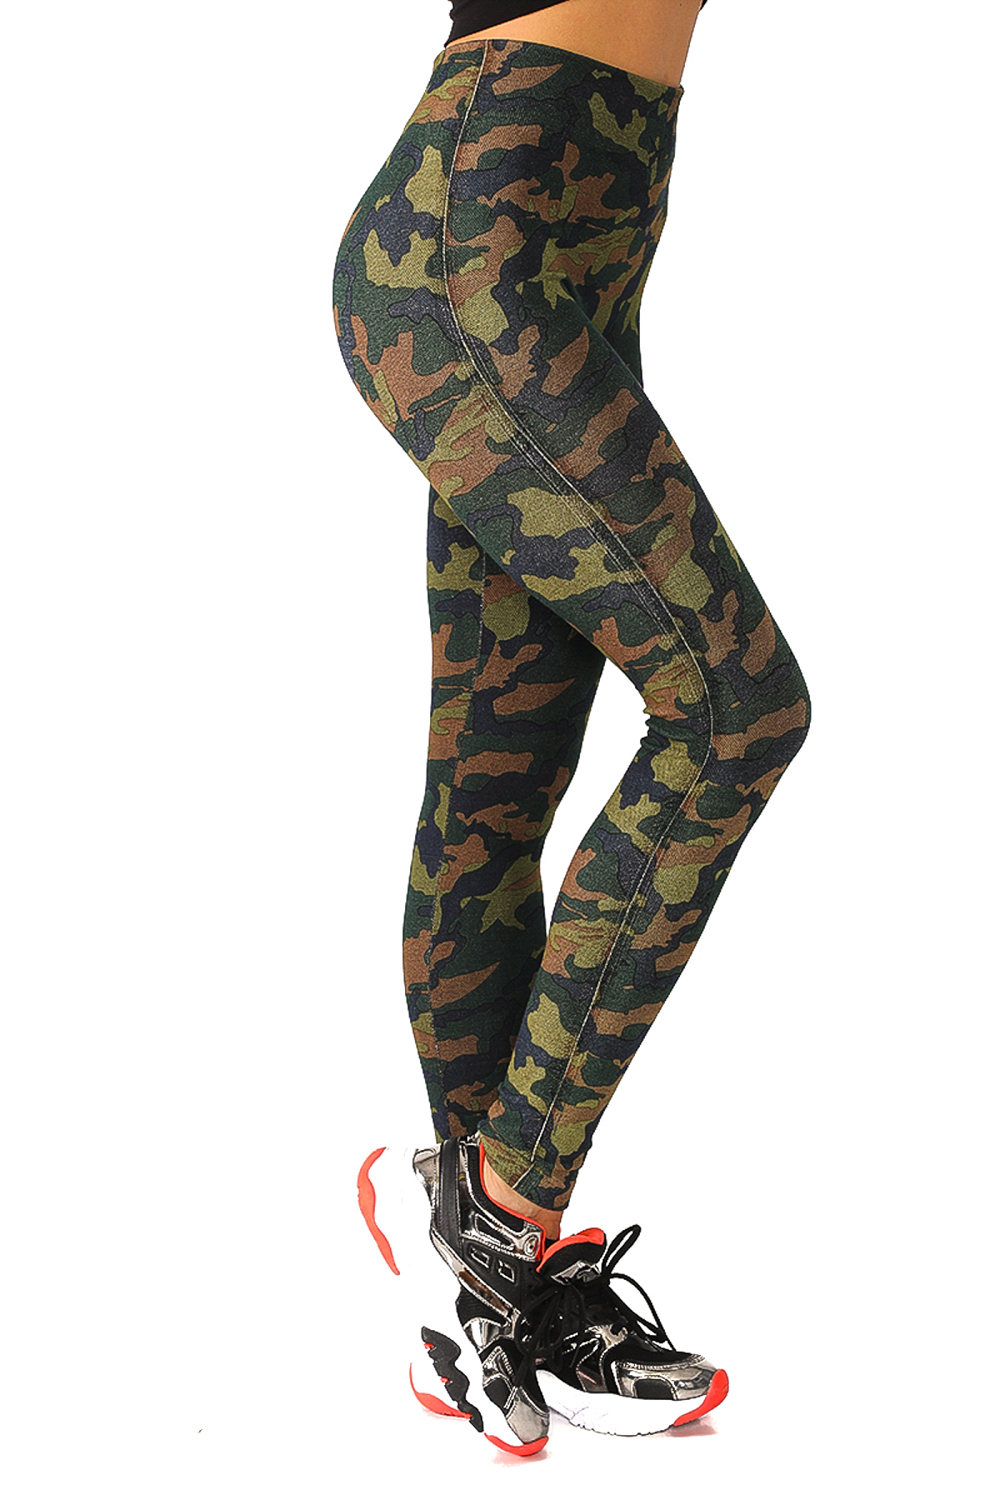 Denim Leggings with Camouflage Pattern - Its All Leggings